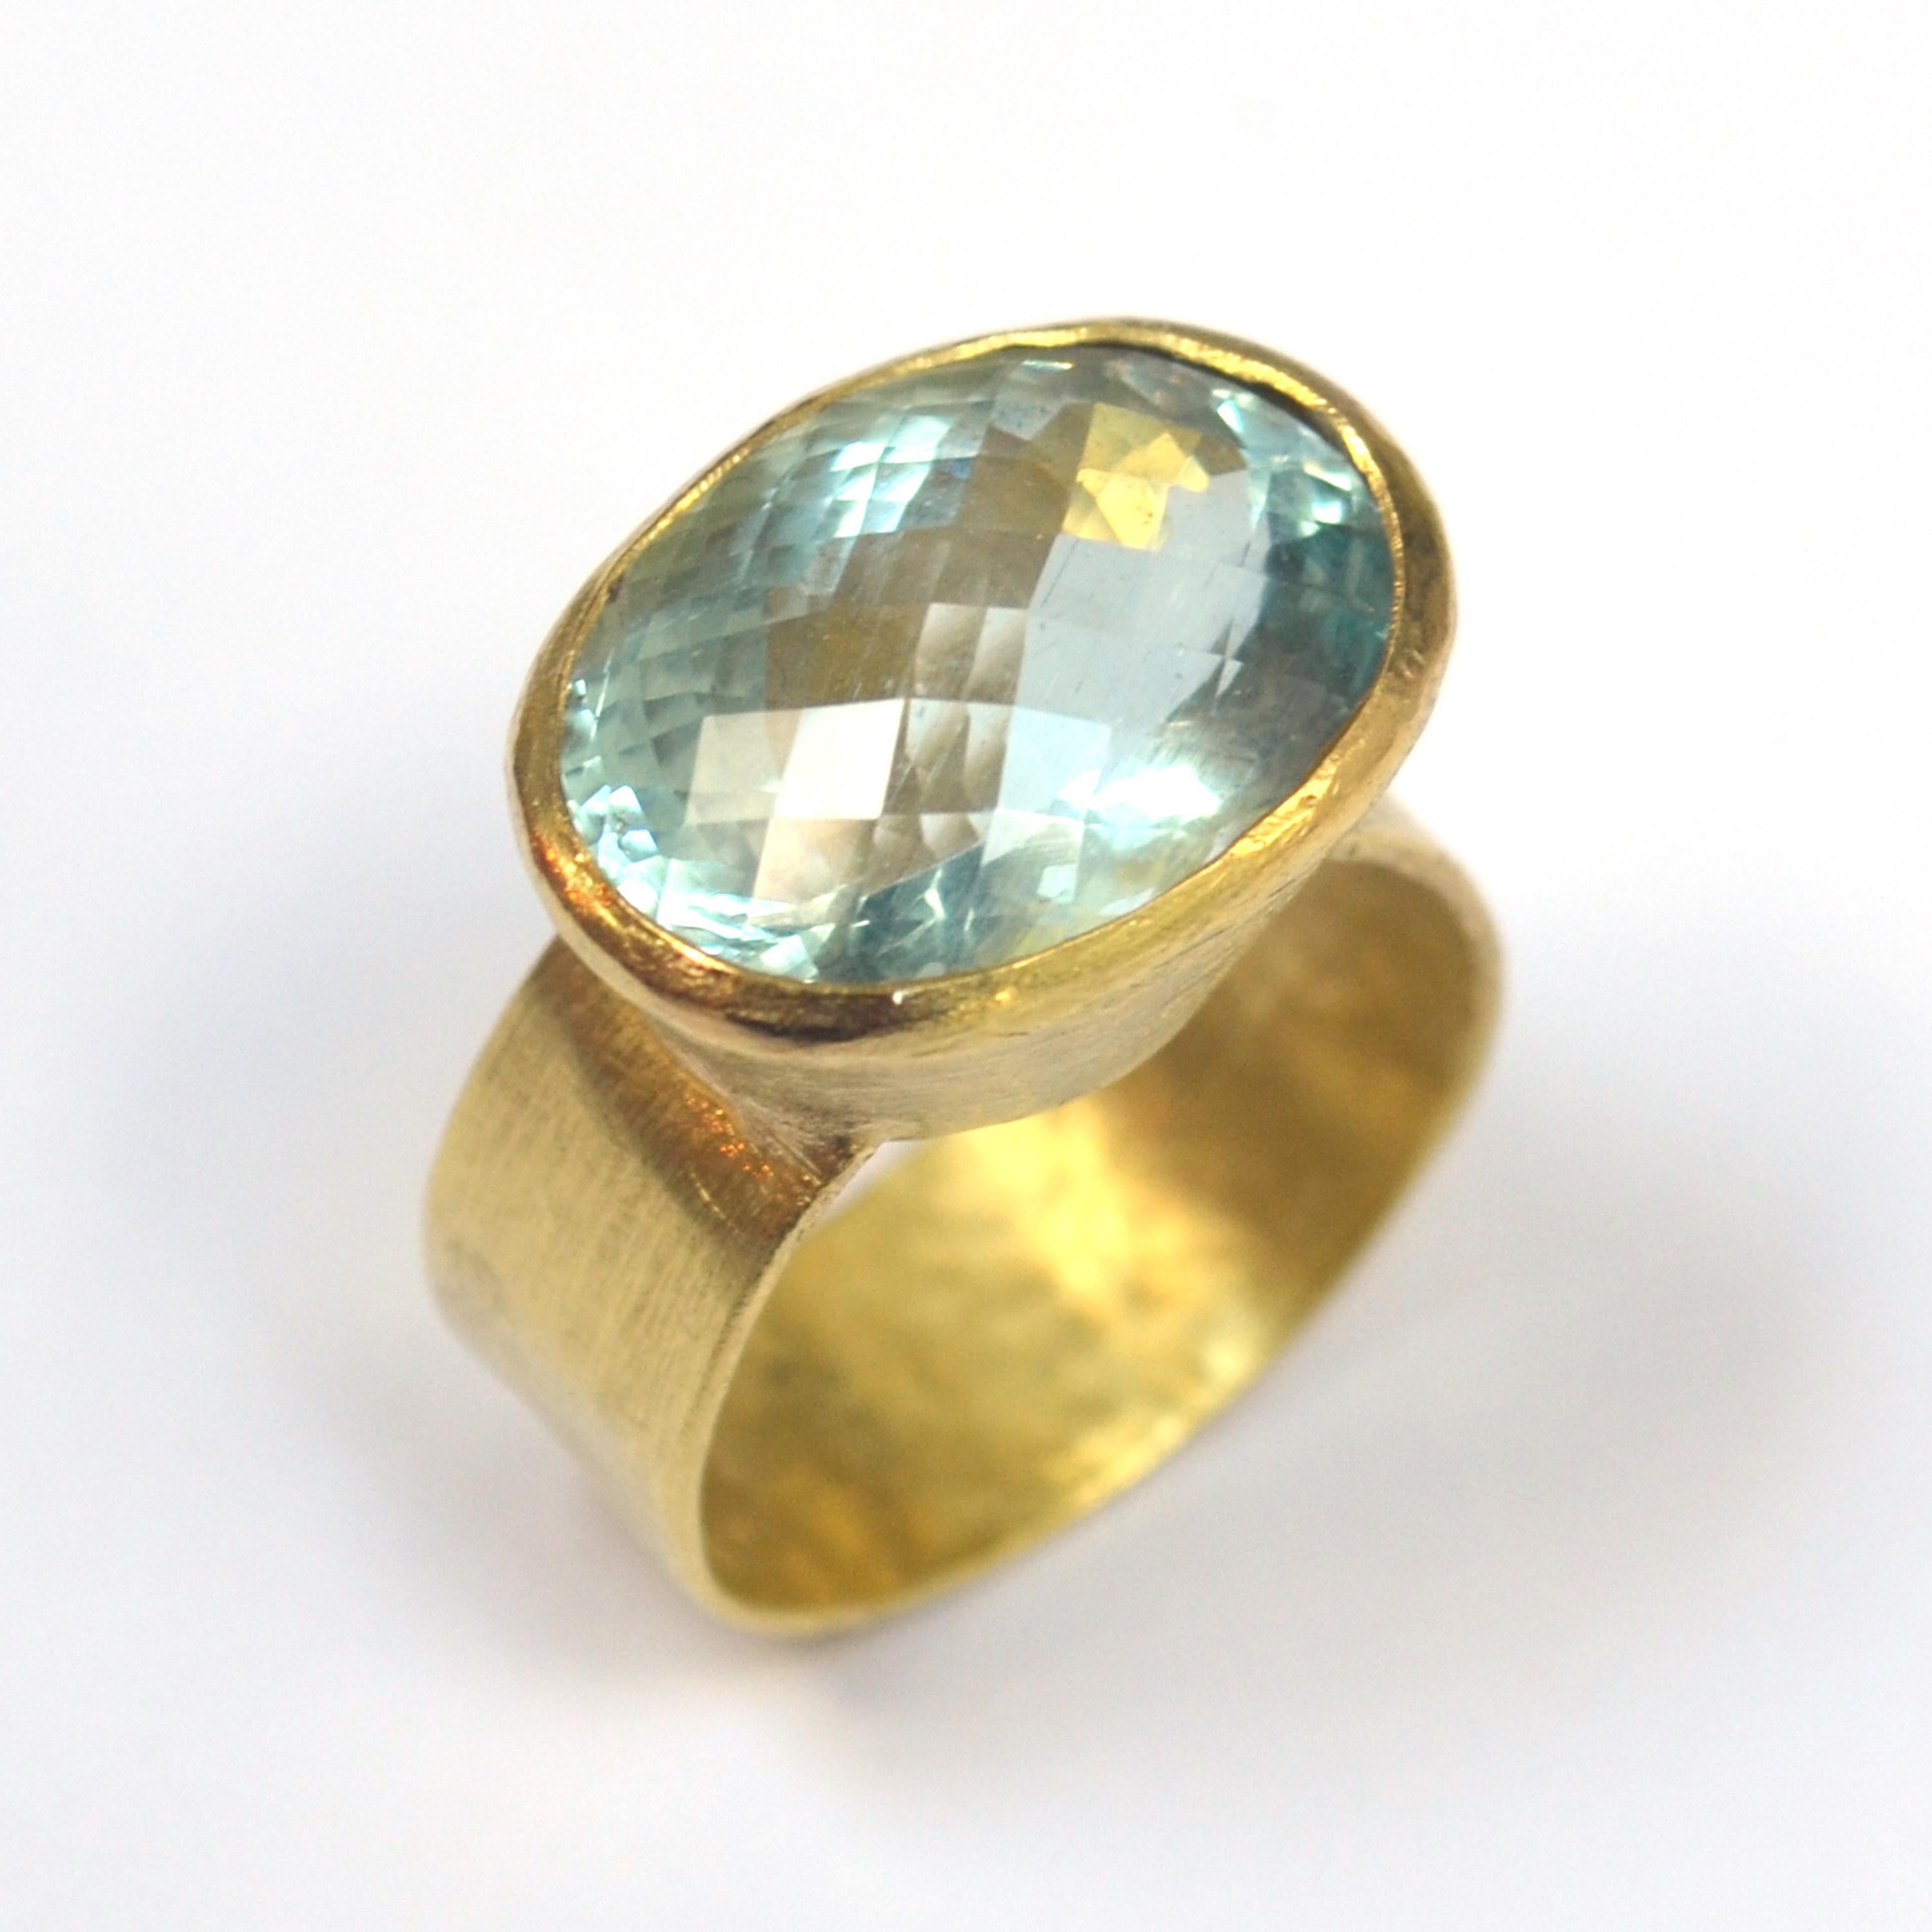 8ct oval Aquamarine with 'chequerboard' cut surface wide hammered texture 18k Gold ring.

This ring is handmade by Disa Allsopp in her London Studio. Disa is inspired by ancient cultures to create contemporary jewellery using traditional